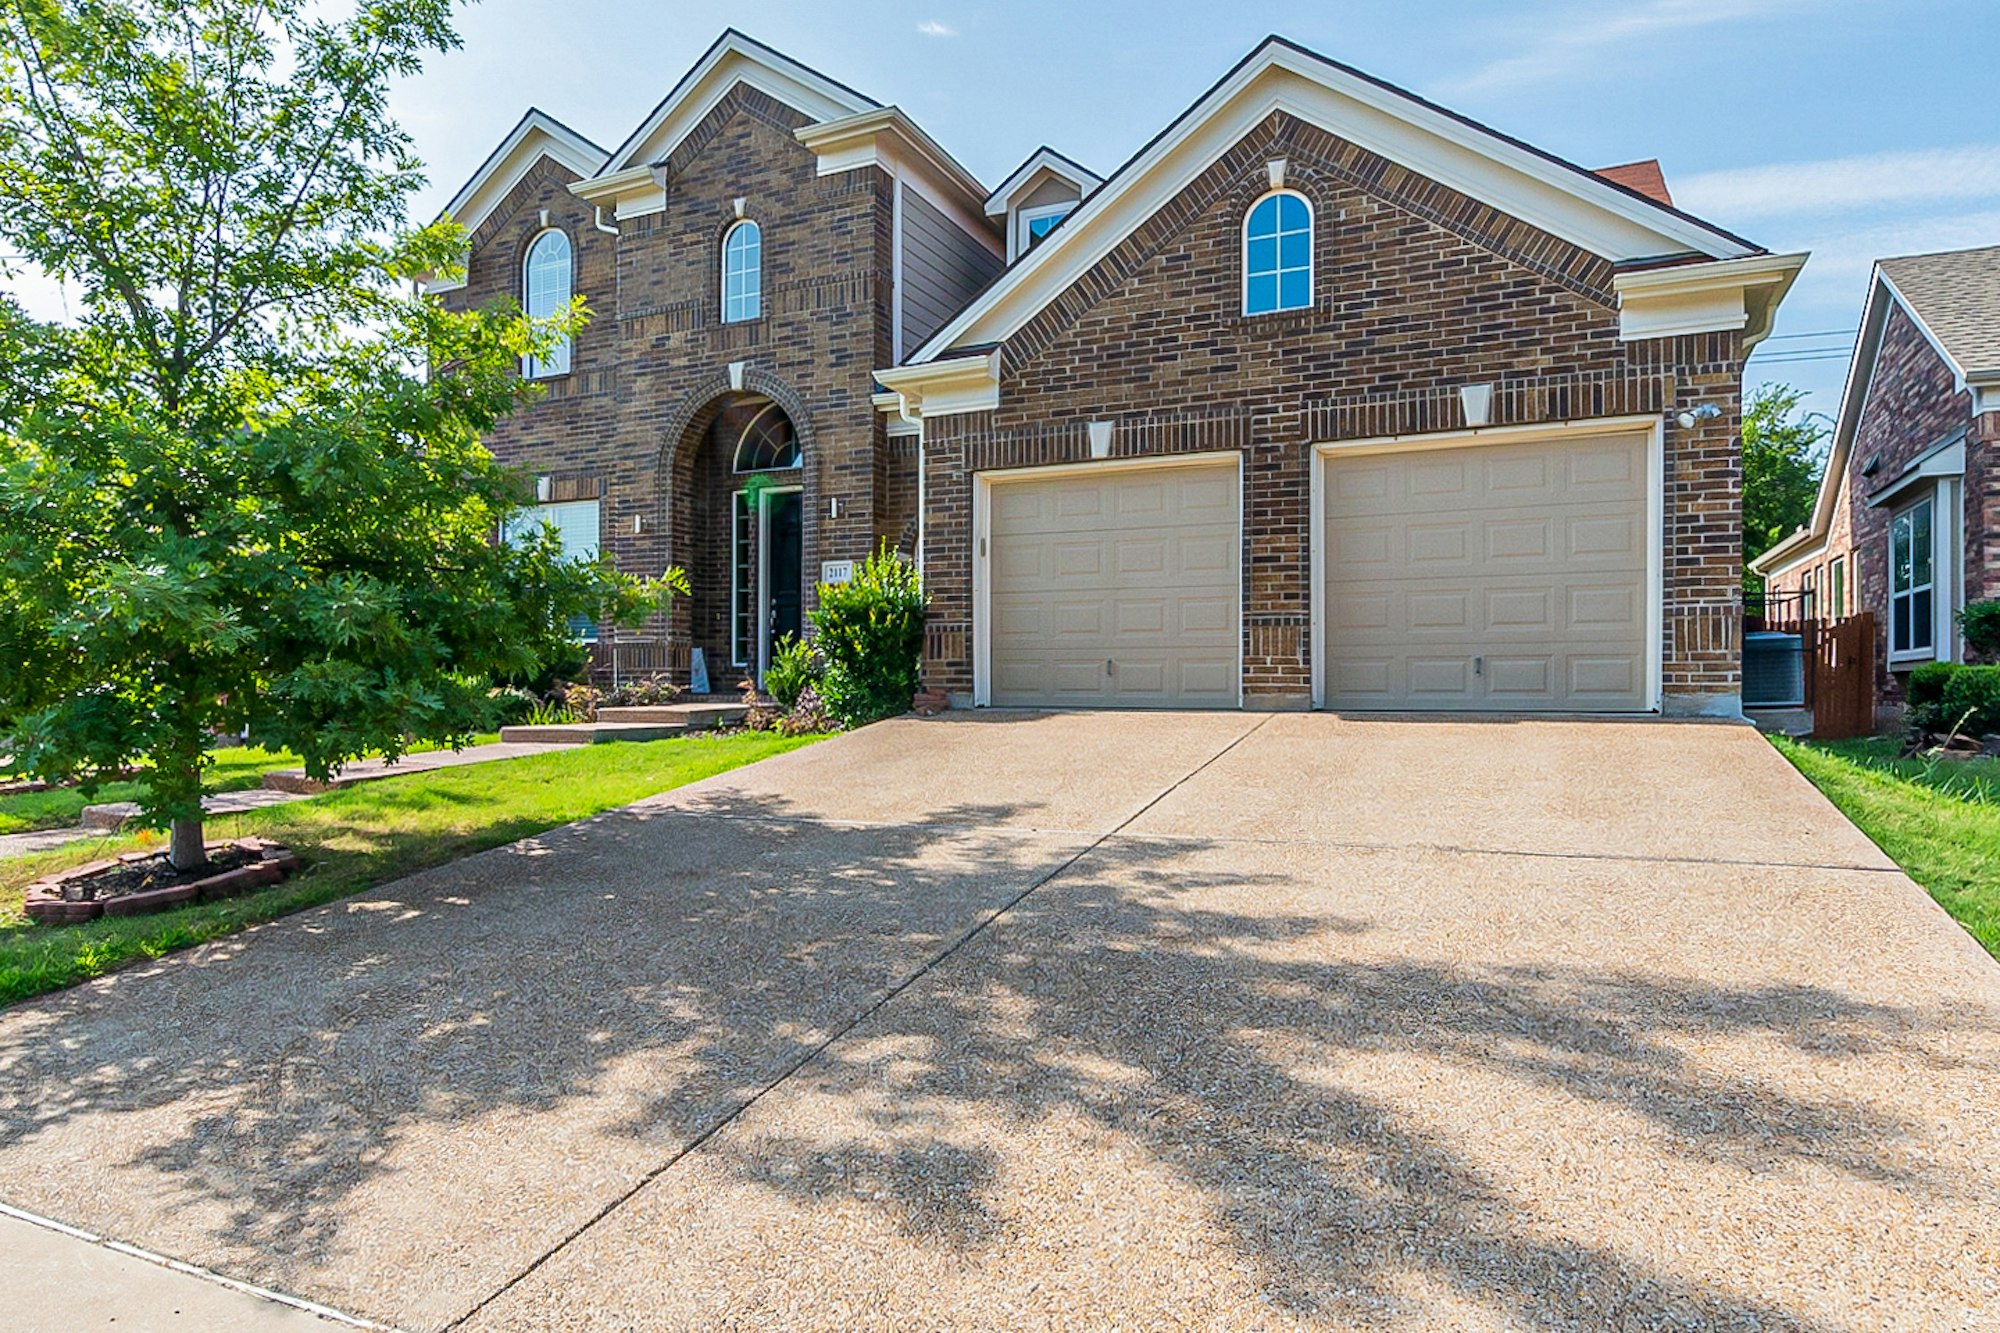 Photo 1 of 31 - 2117 Central Park Dr, Wylie, TX 75098